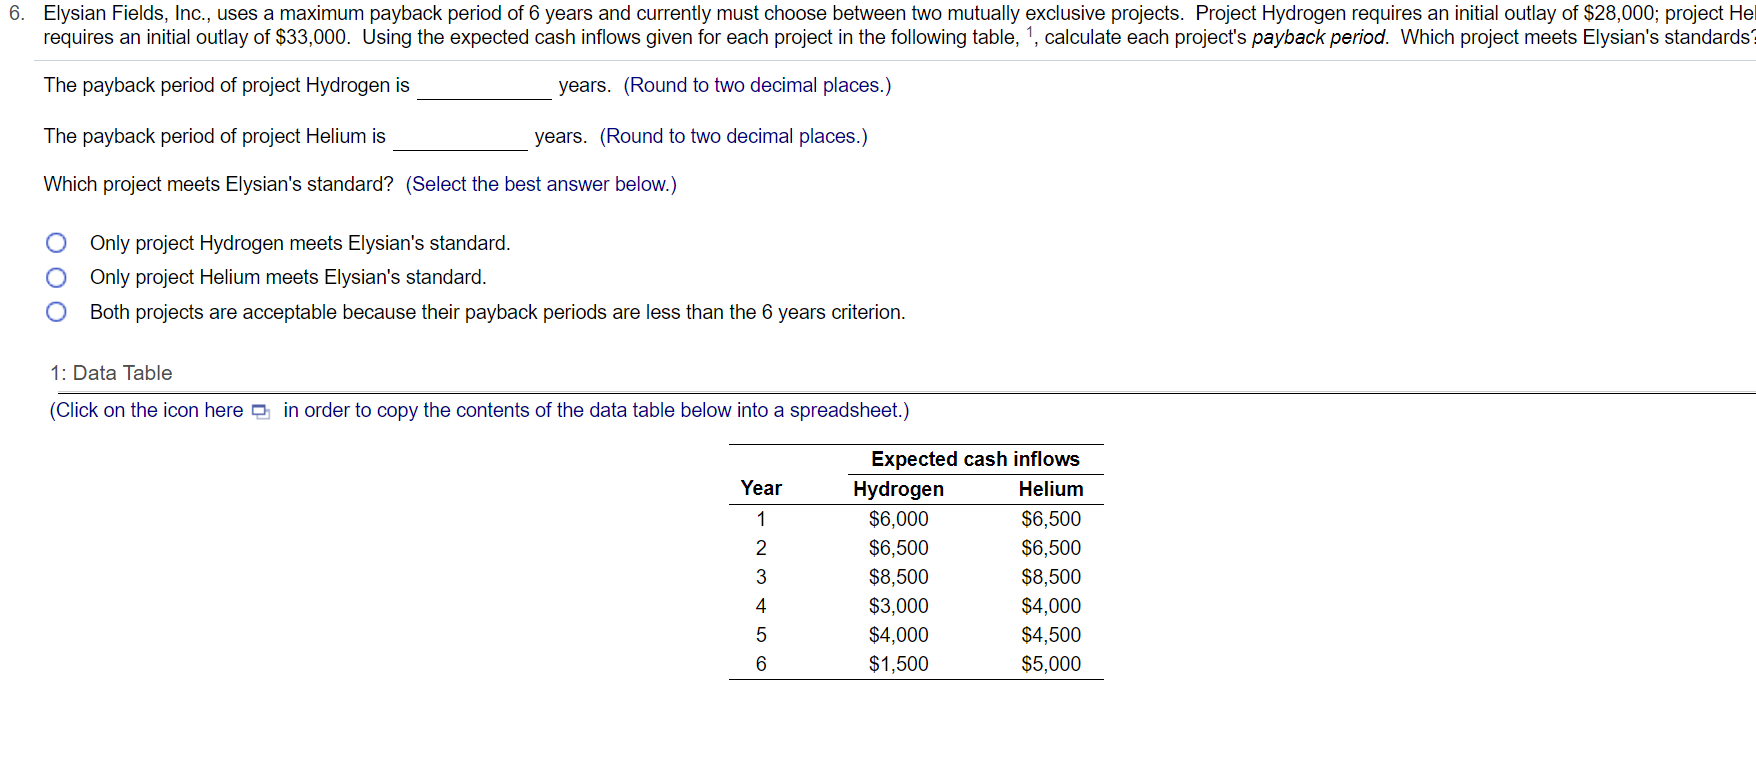 Elysian Fields, Inc., uses a maximum payback period of 6 years and currently must choose between two mutually exclusive projects. Project Hydrogen requires an initial outlay of $28,000; project He
requires an initial outlay of $33,000. Using the expected cash inflows given for each project in the following table, 1, calculate each project's payback period. Which project meets Elysian's standards
The payback period of project Hydrogen is
years. (Round to two decimal places.)
The payback period of project Helium is
years. (Round to two decimal places.)
Which project meets Elysian's standard? (Select the best answer below.)
Only project Hydrogen meets Elysian's standard.
O Only project Helium meets Elysian's standard.
Both projects are acceptable because their payback periods are less than the 6 years criterion.
